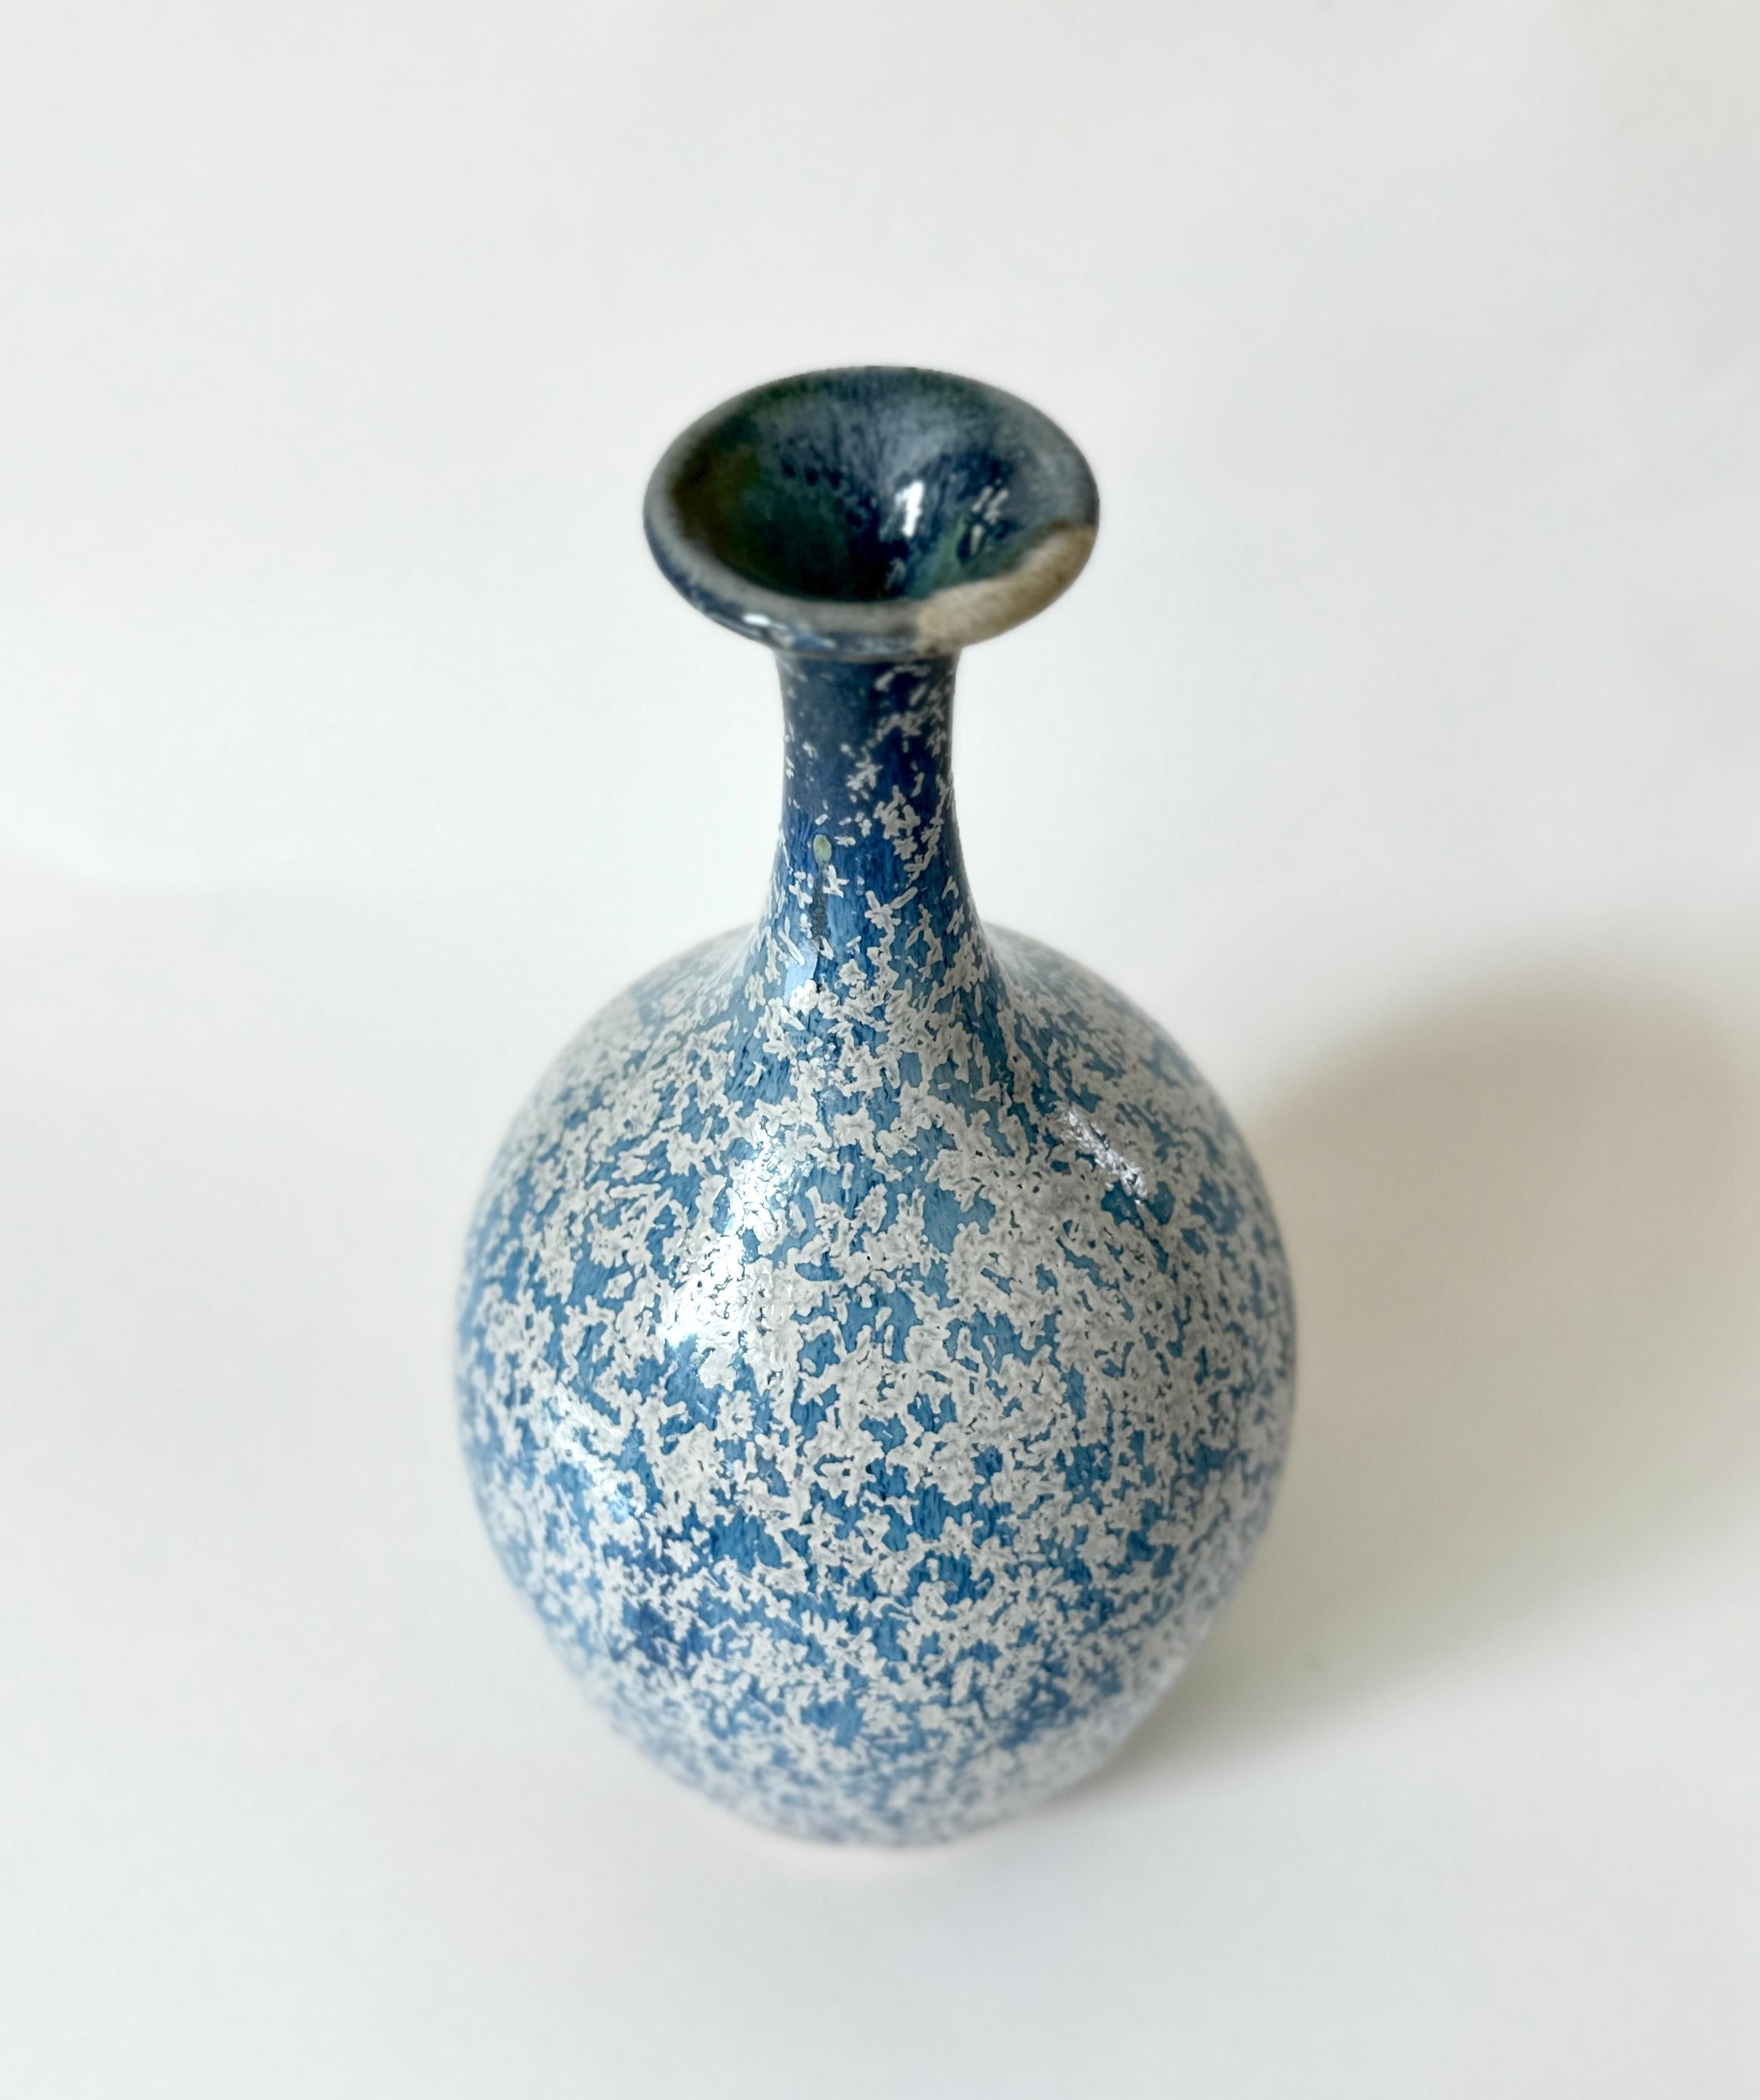 Frosty Blue Bottleneck Vessel No. 6 by Dana Chieco In New Condition For Sale In Culver City, CA